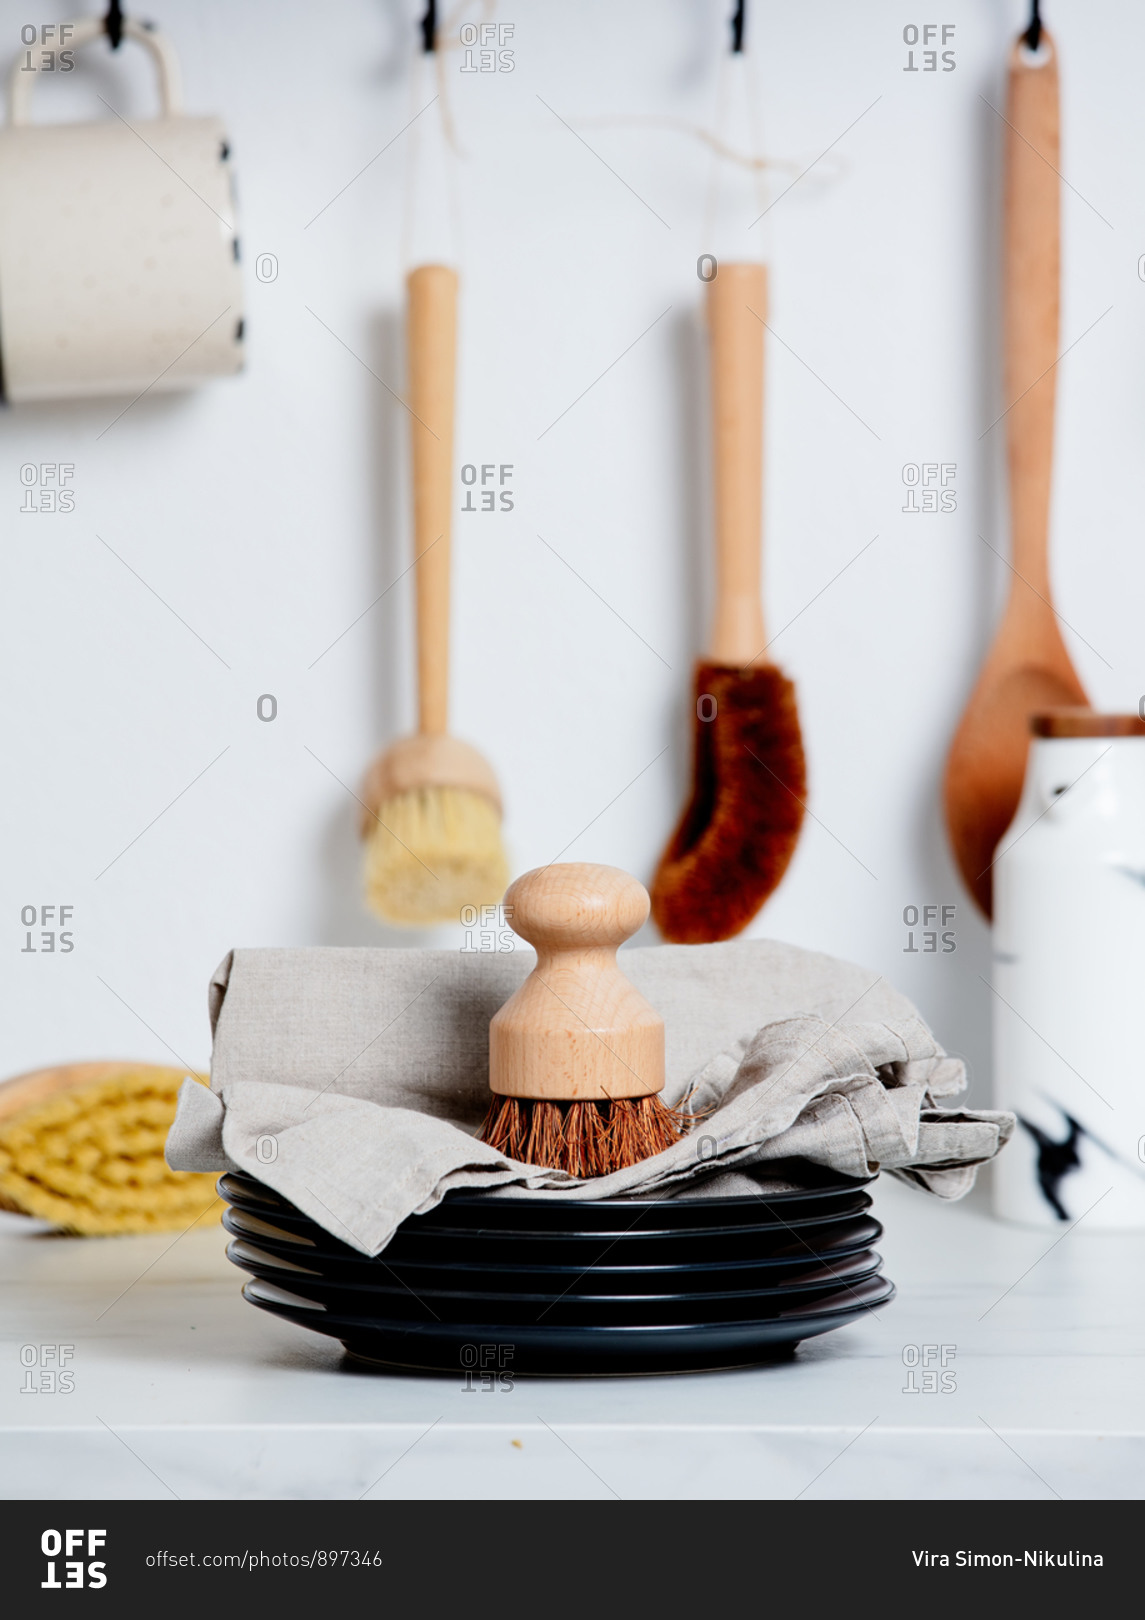 Eco-friendly wooden brushes for washing dishes